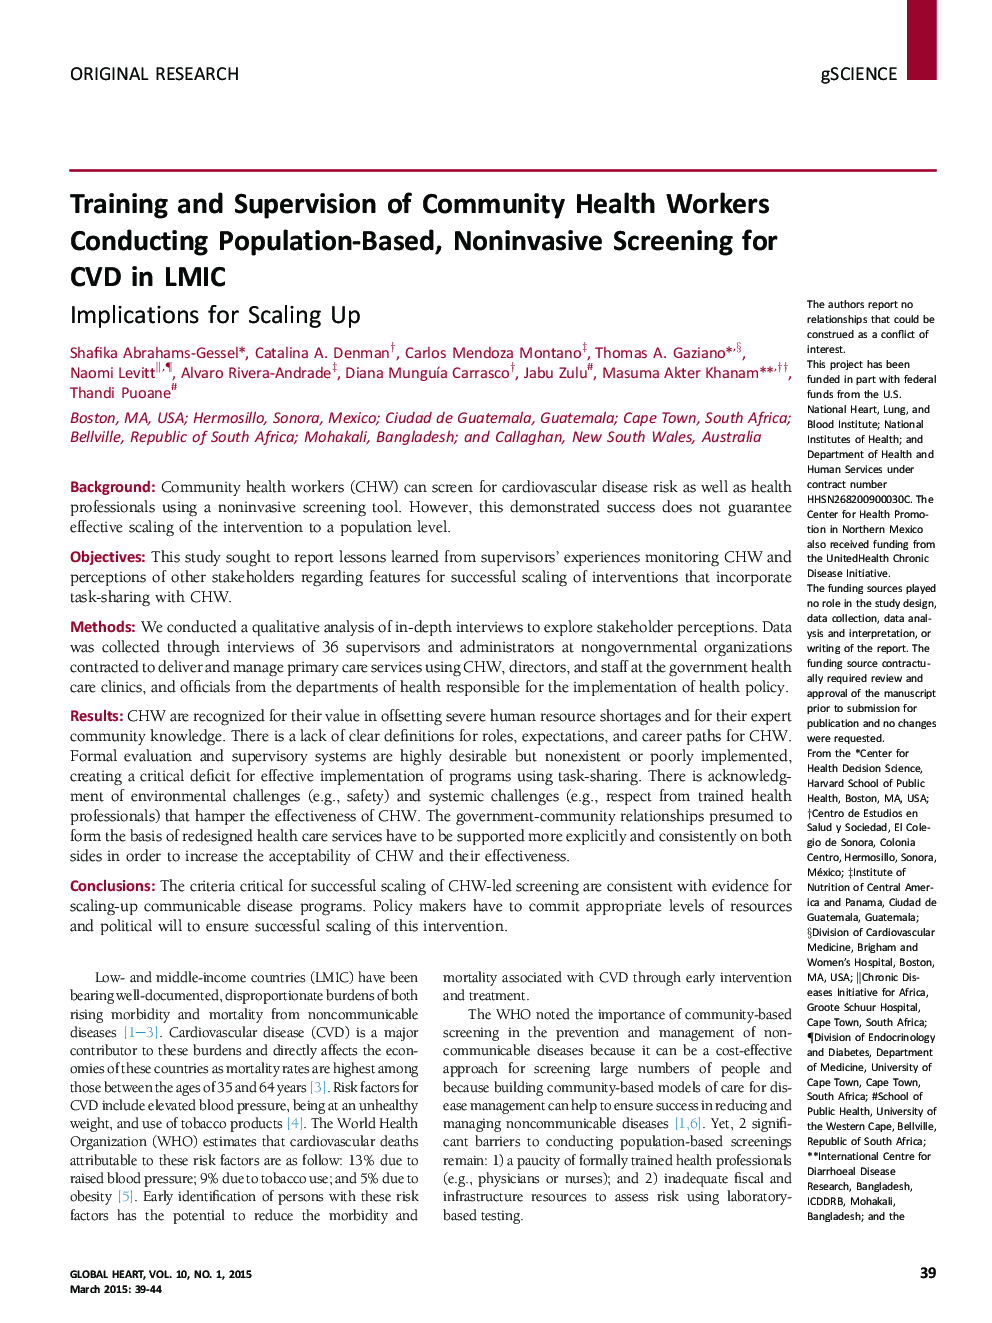 Training and Supervision of Community Health Workers Conducting Population-Based, Noninvasive Screening for CVD in LMIC : Implications for Scaling Up